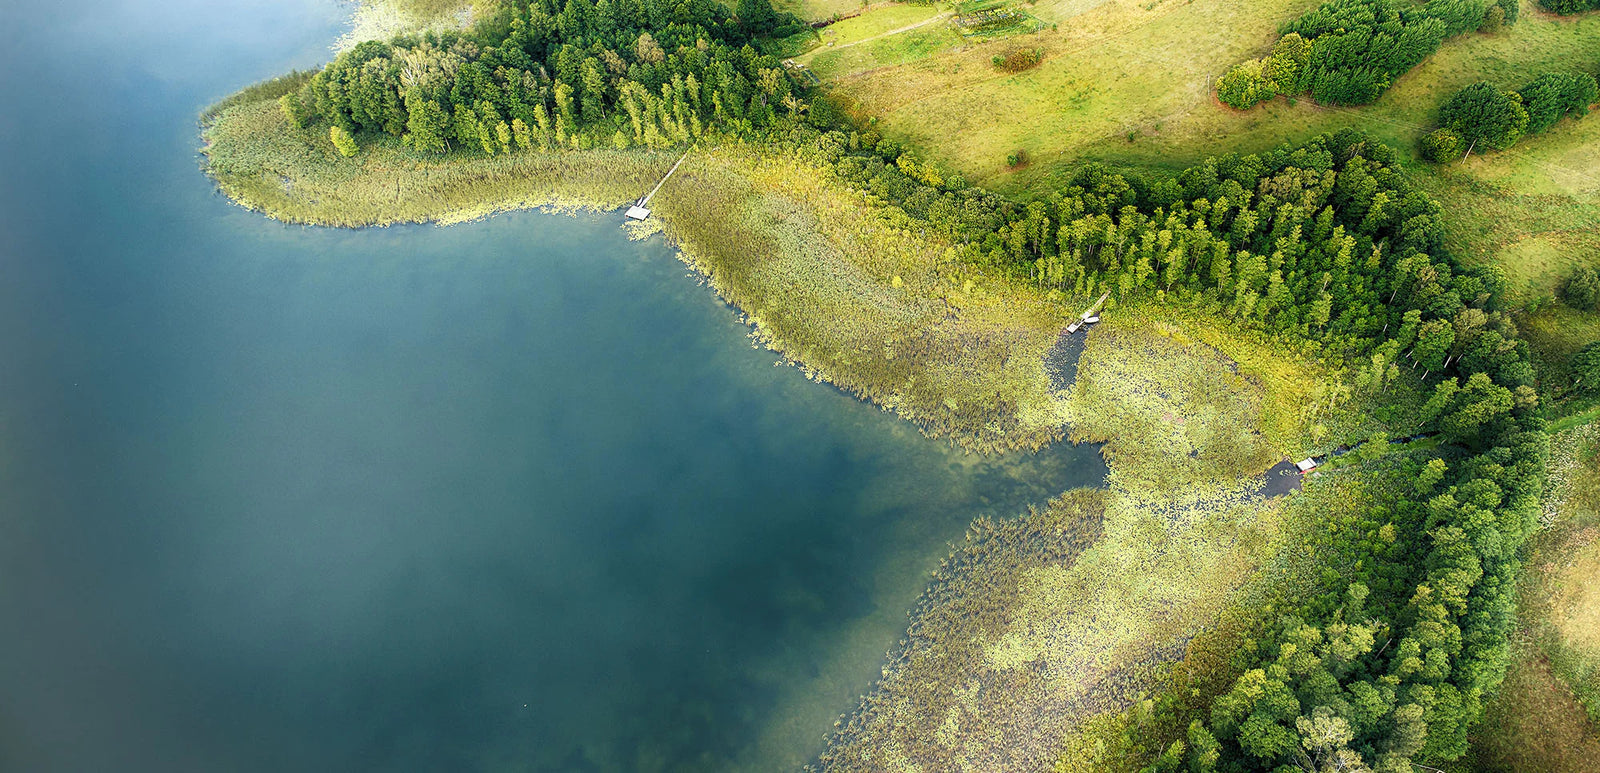 Aerial landscape from a drone at a lake shore